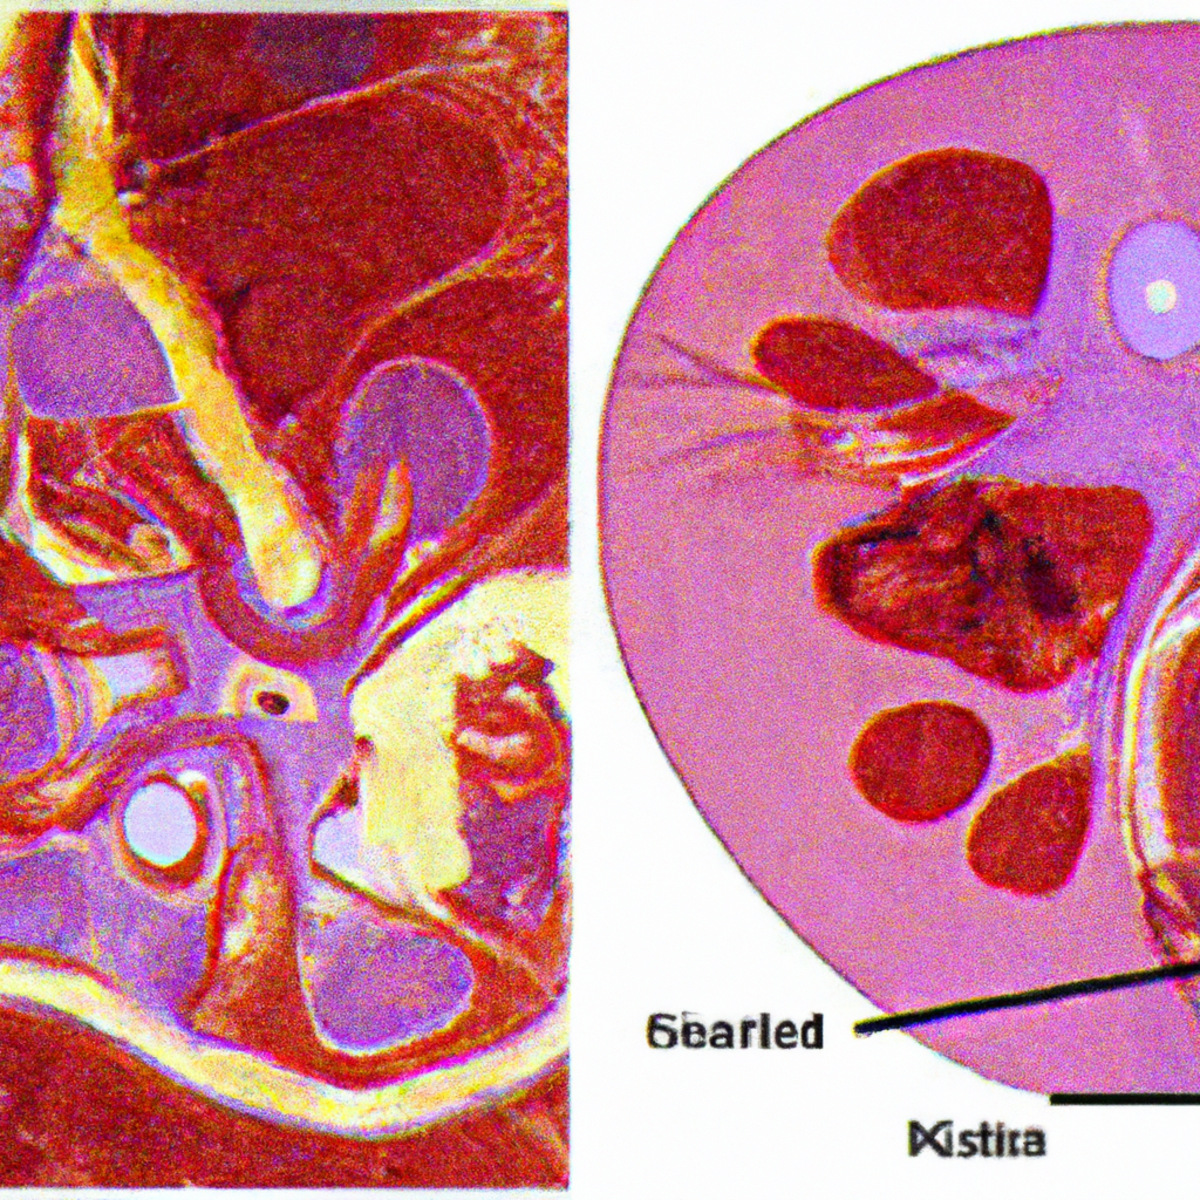 Close-up photo comparing diseased gallbladder affected by Xanthogranulomatous Cholecystitis to healthy gallbladder, illustrating differences.